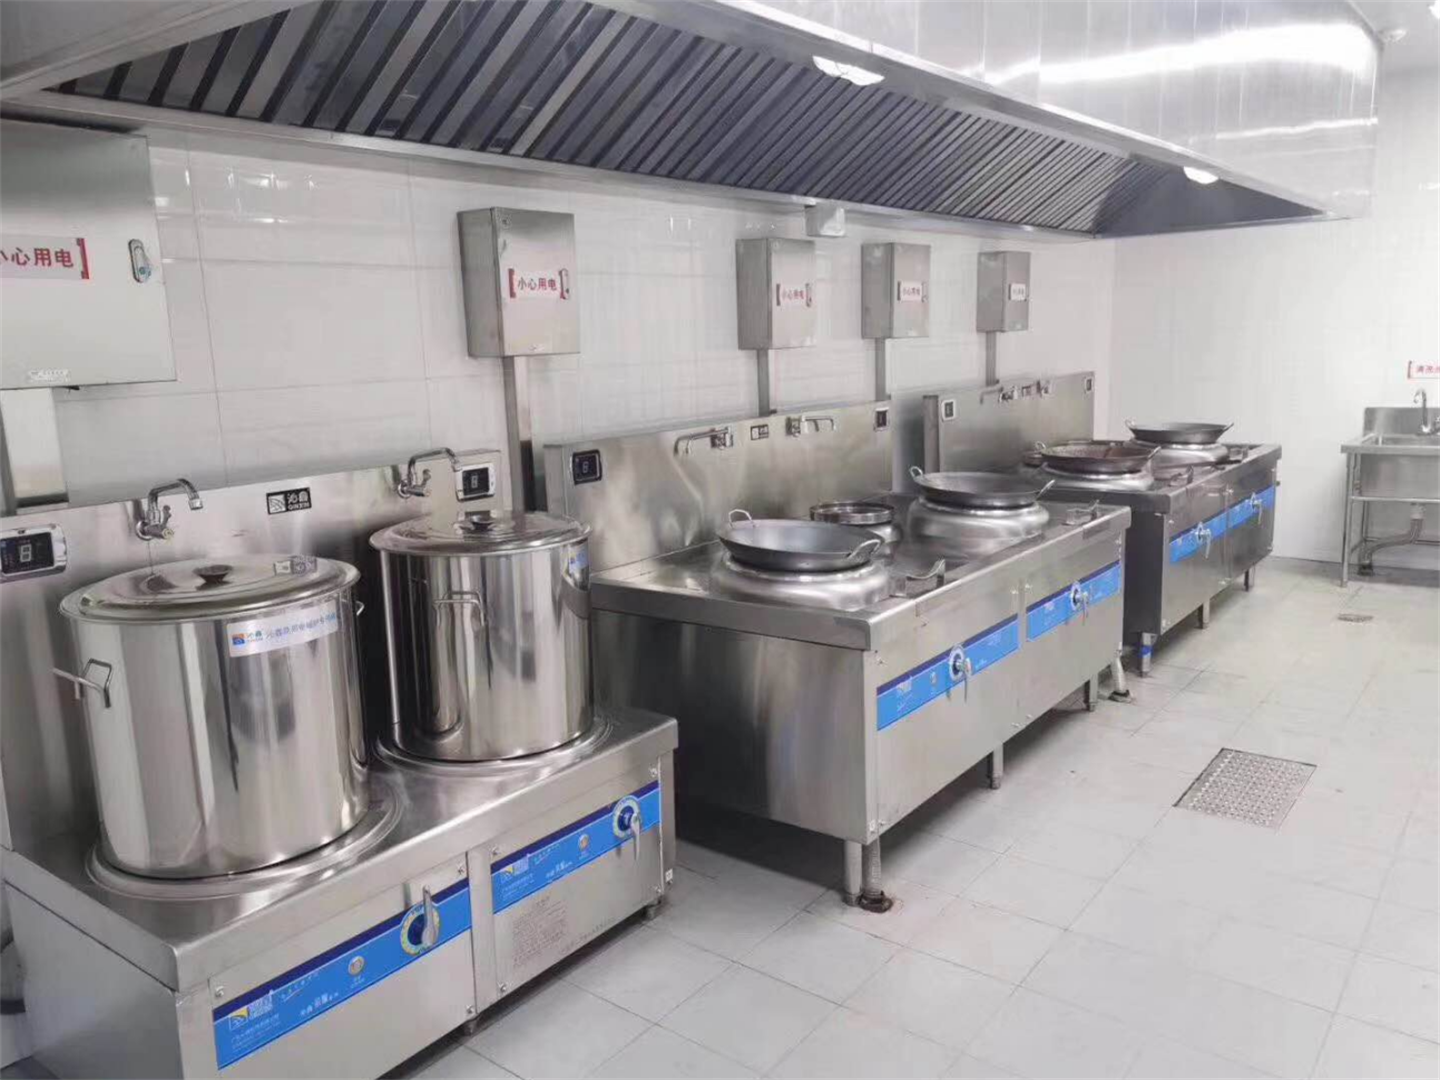 https://leadstov.com/wp-content/uploads/2023/04/The-application-of-Lestov-chinese-commercial-induction-wok-range-7.png